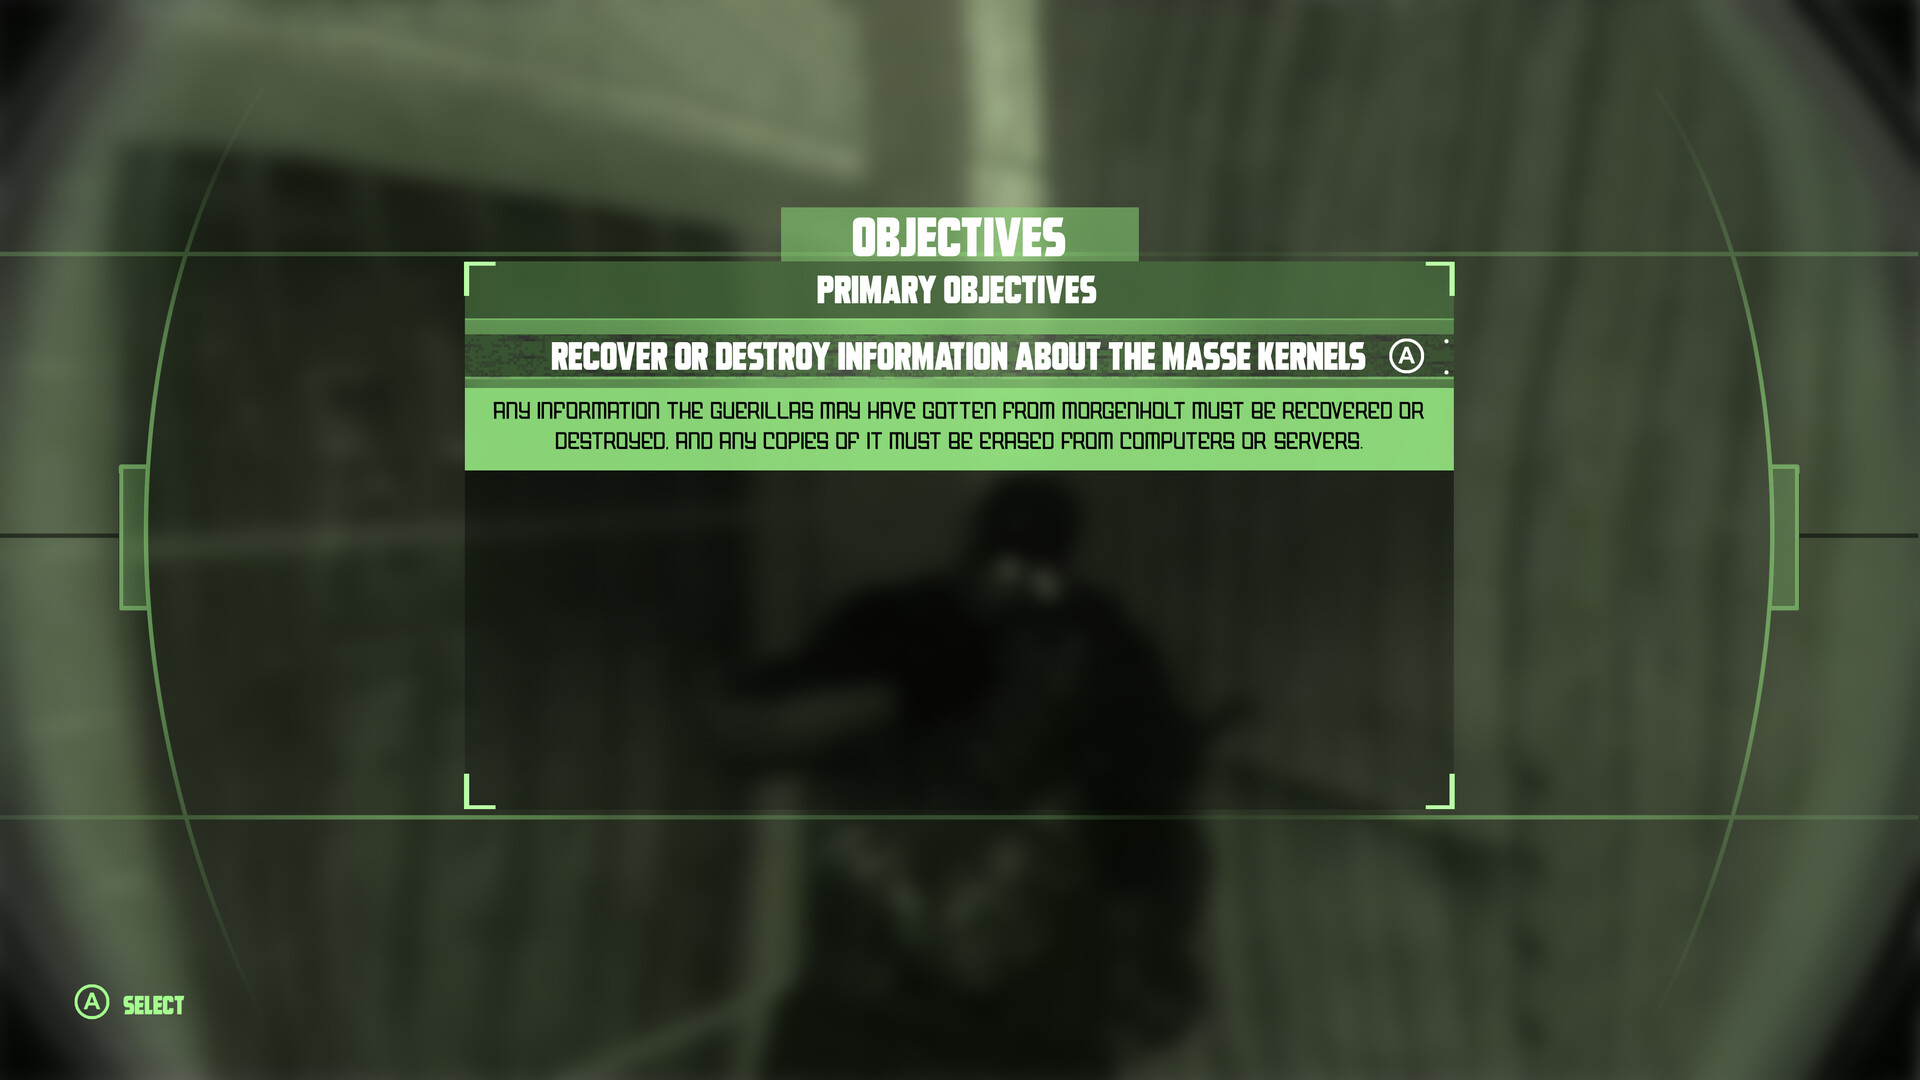 ArtStation - Reimagined UI for Splinter Cell Chaos Theory